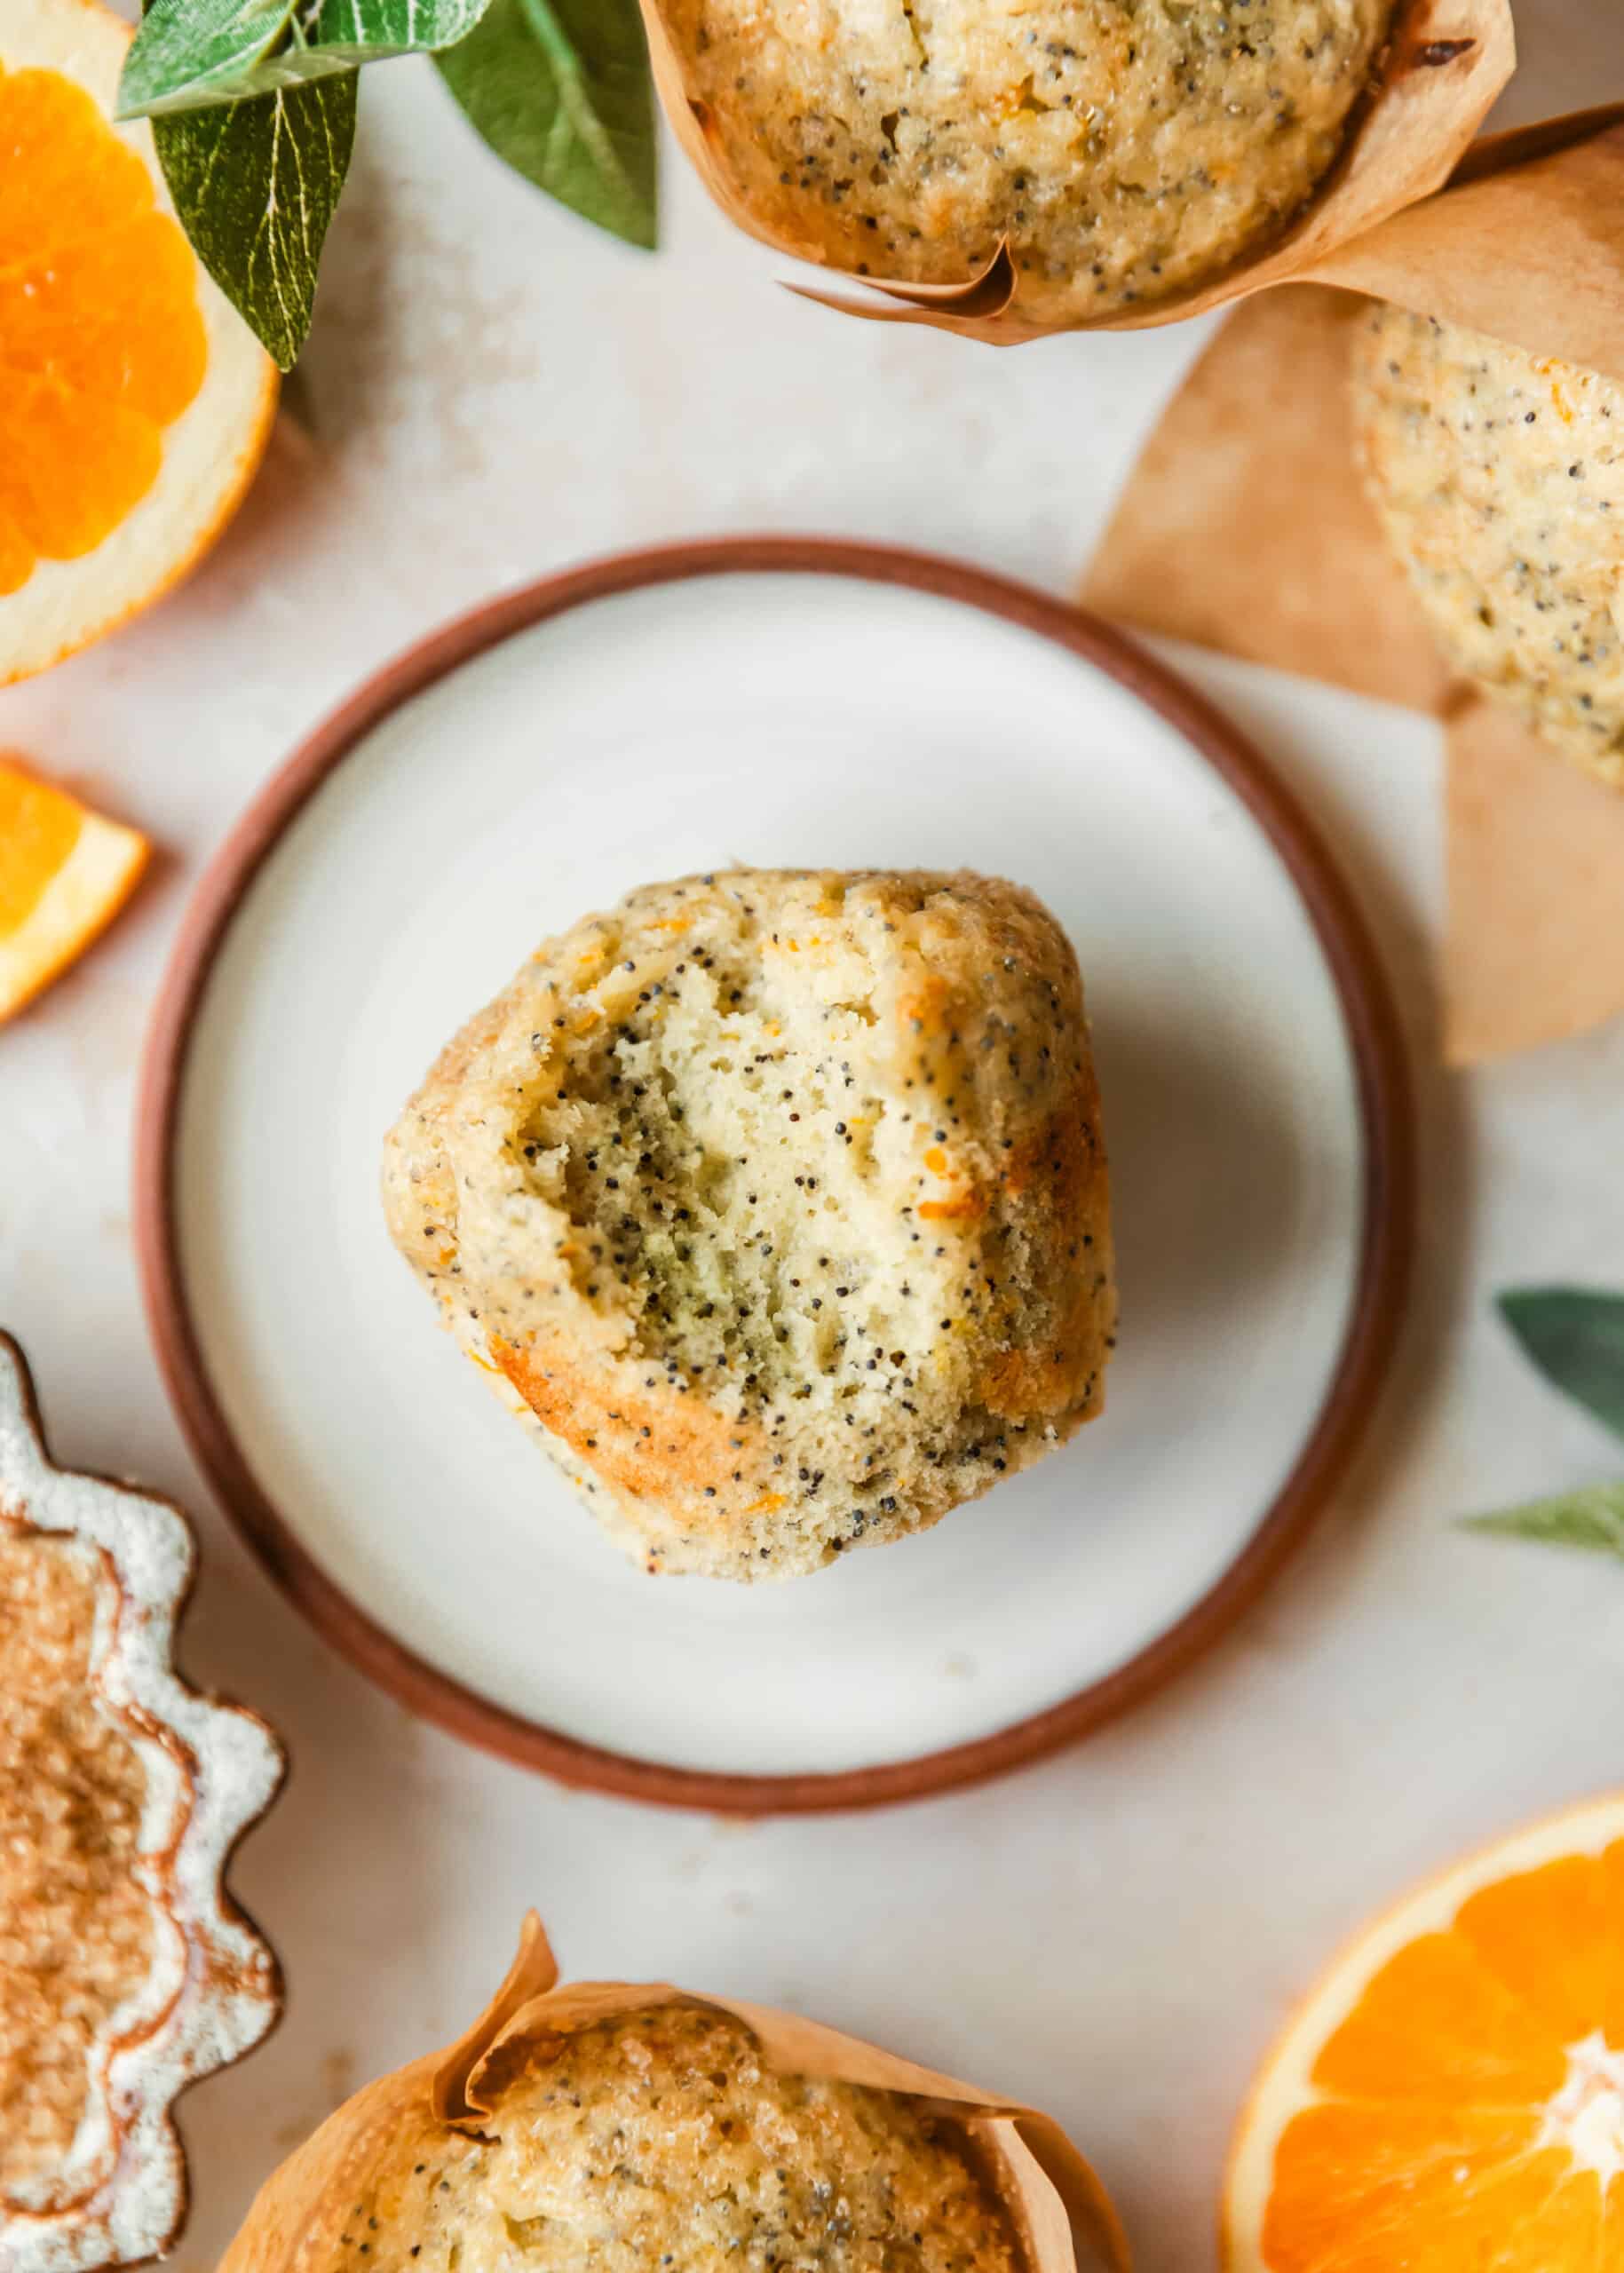 A citrus muffin with a bite taken out of it on a white plate next to sliced navel oranges, leaves, muffins, and a brown bowl of sugar on a beige counter.